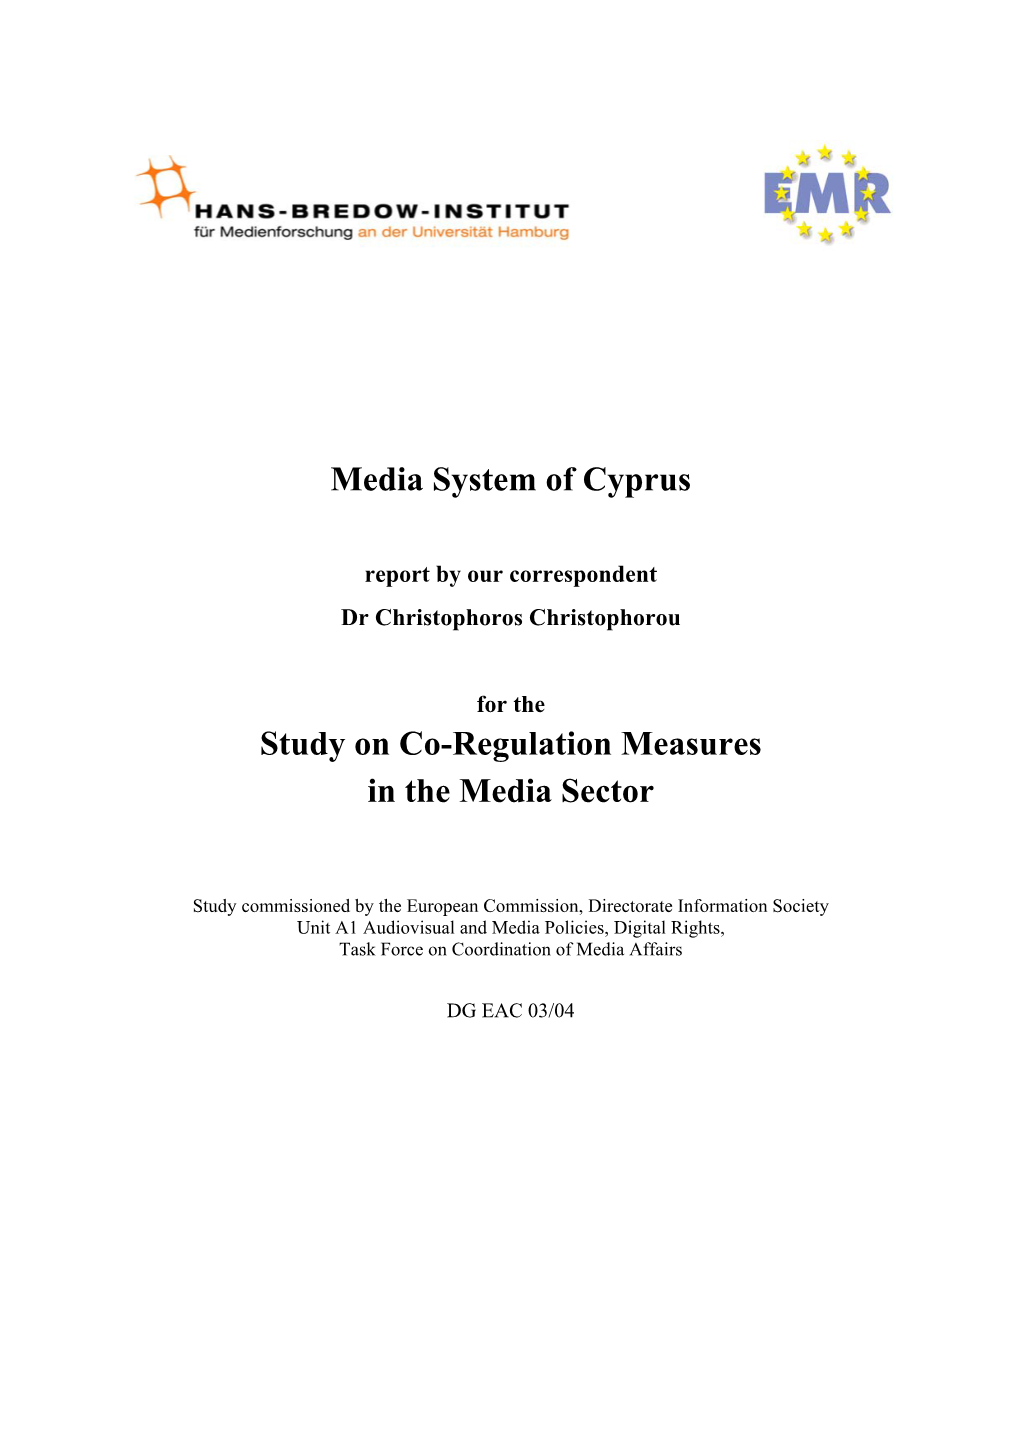 Media System of Cyprus Study on Co-Regulation Measures in The